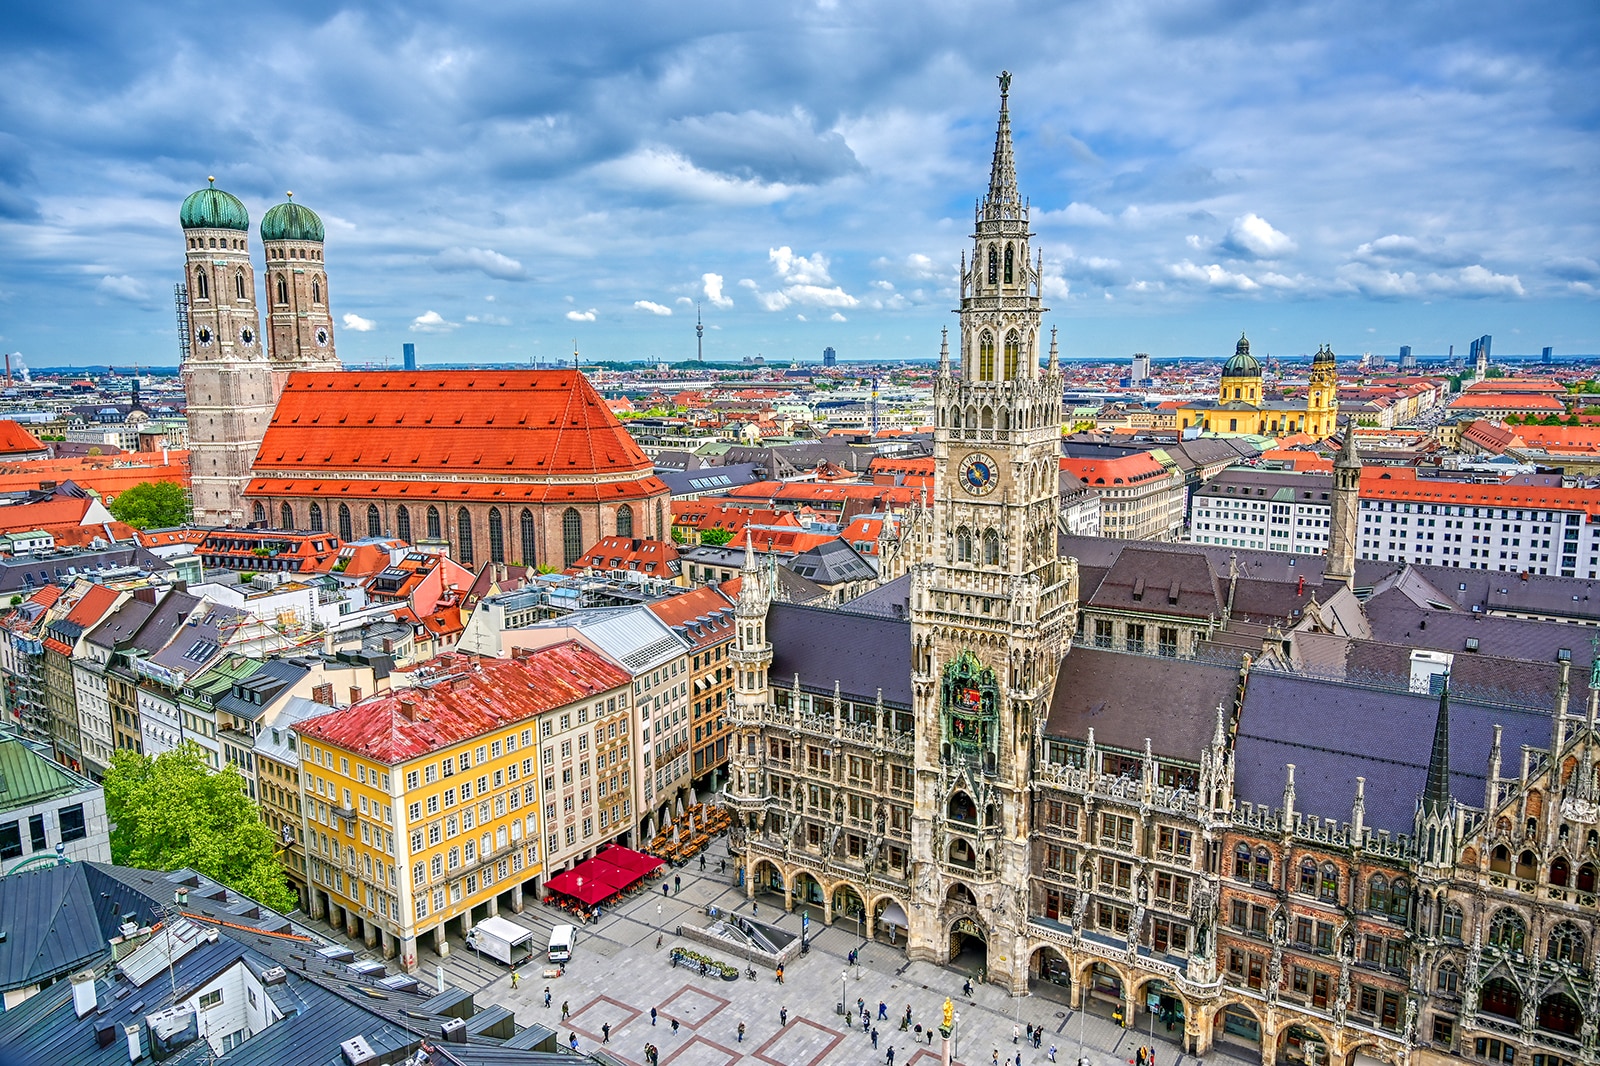 🗽 What Famous Landmark Should You Visit Next Based on Your A-Z Travel Bucket List? Munich, Germany